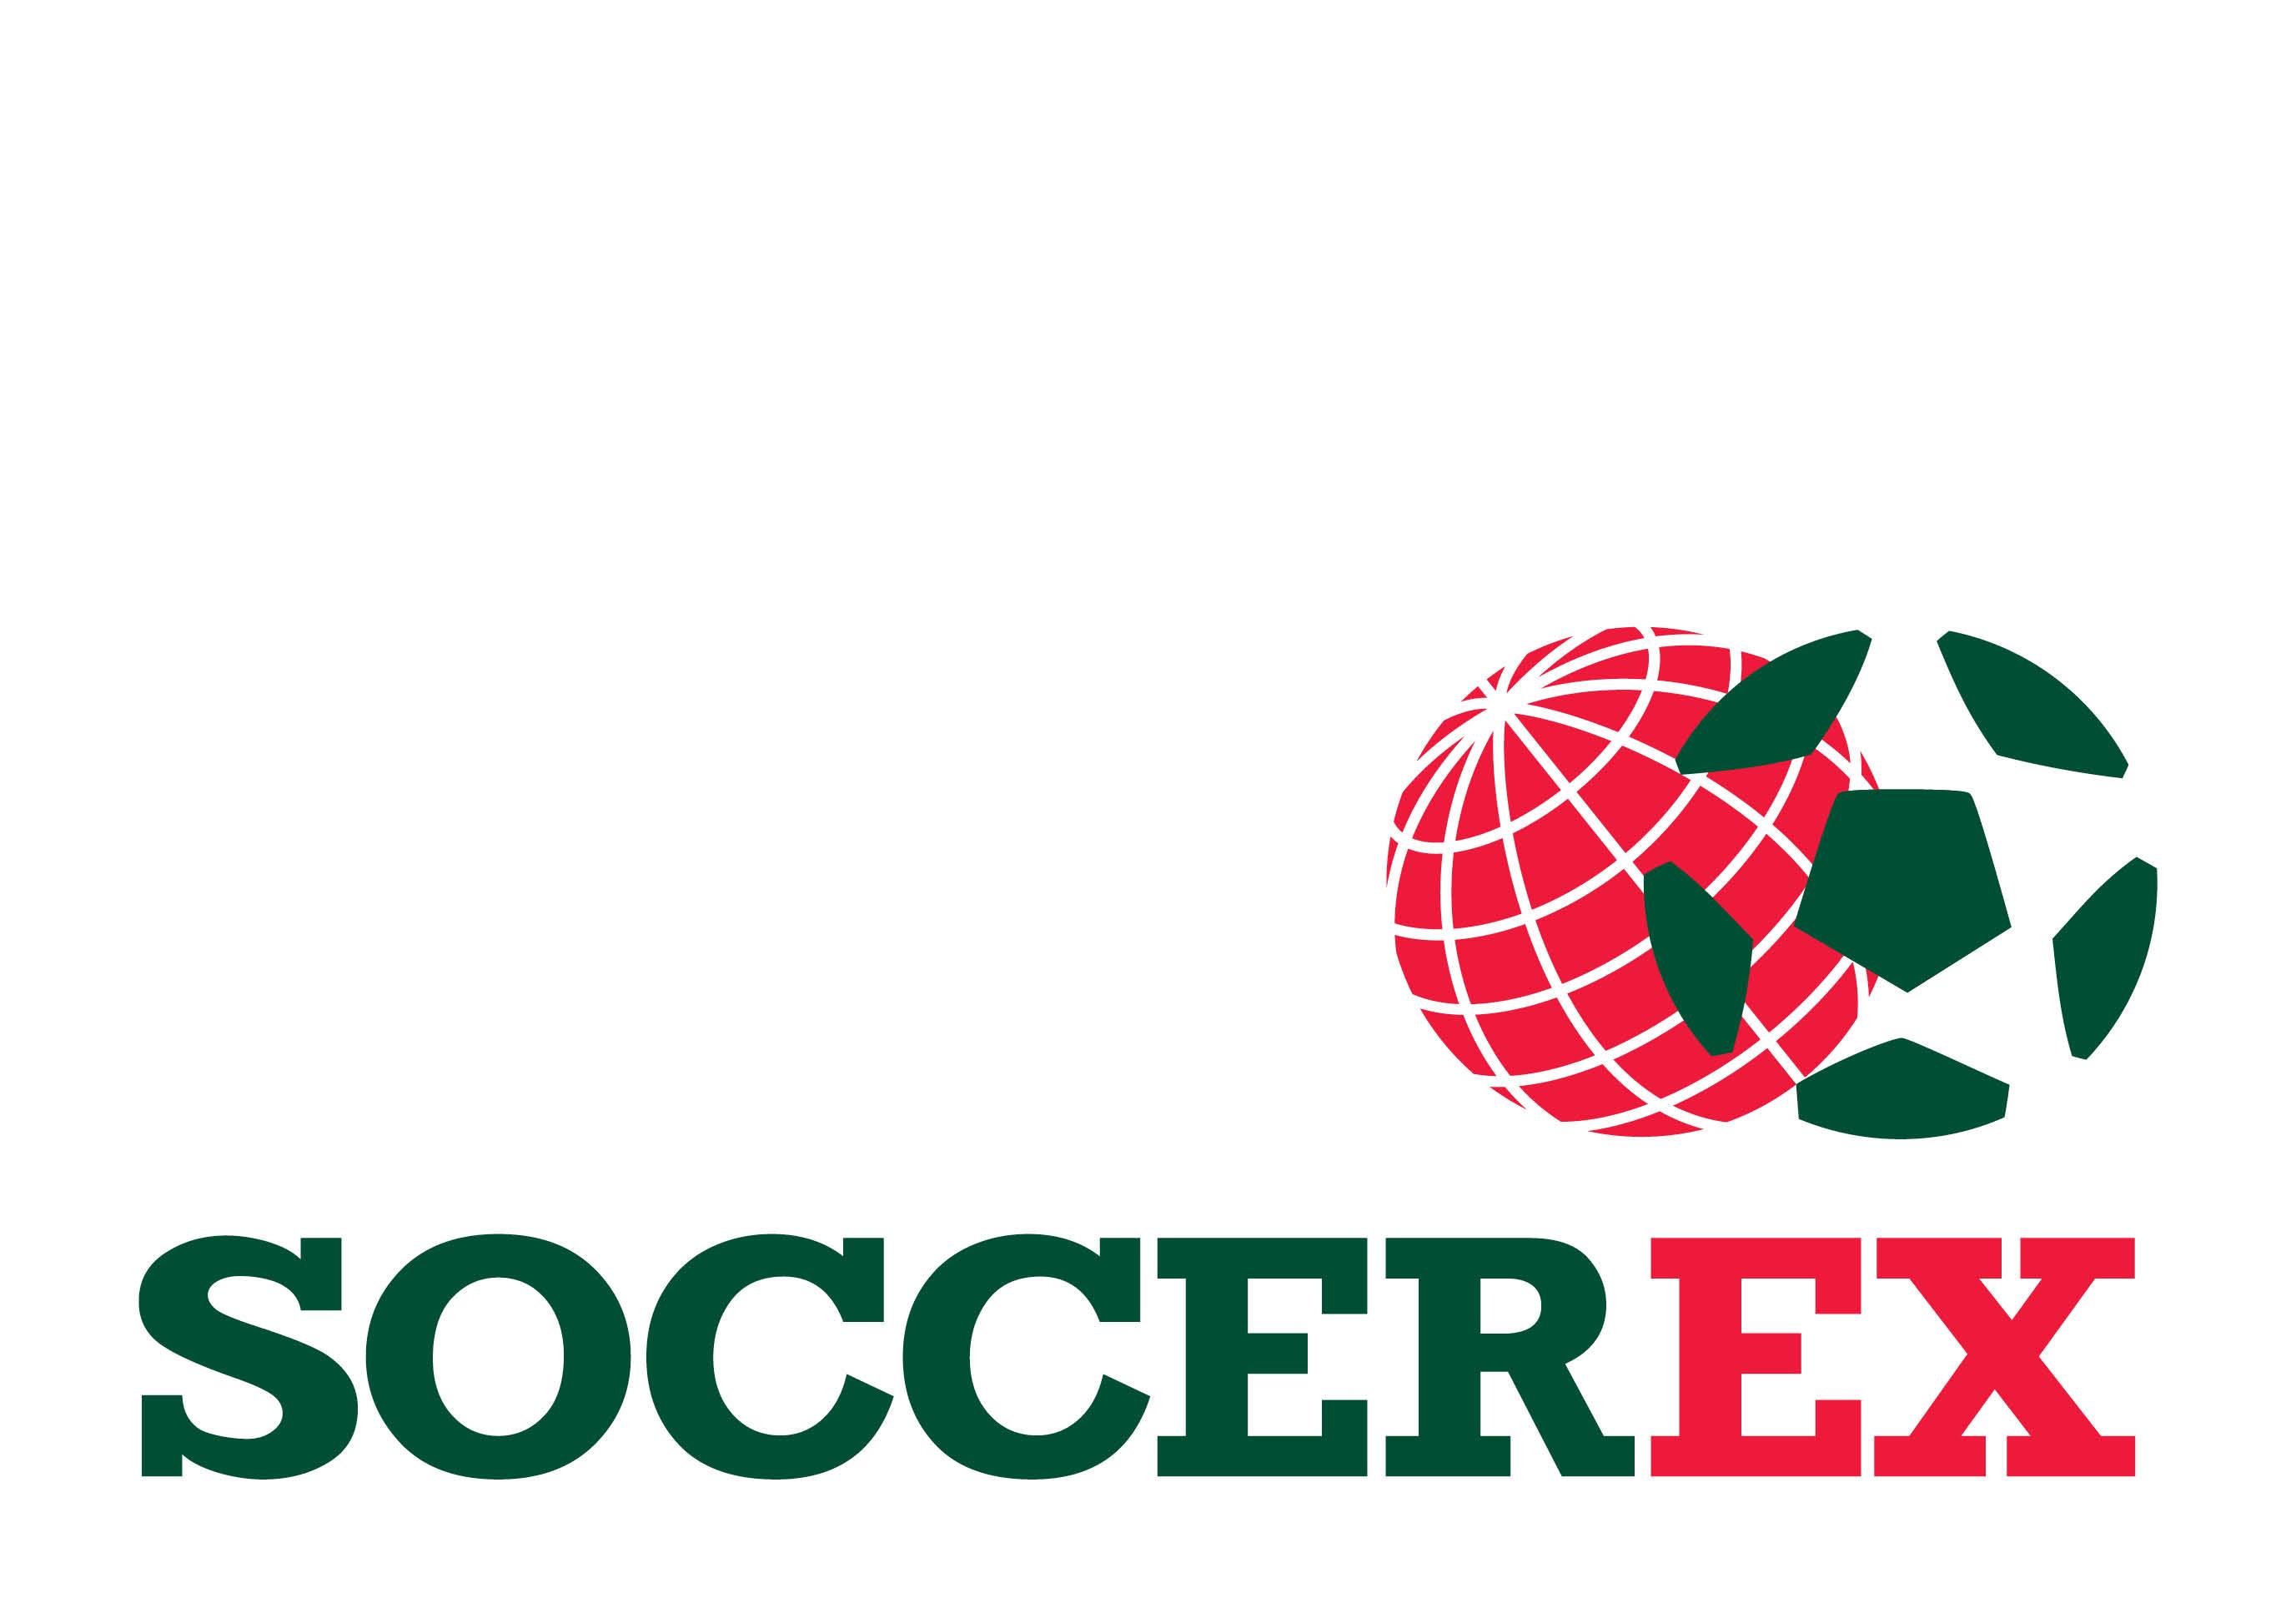 Soccerex has hit out at the Rio de Janeiro State Government after claims that the convention was cancelled due to a lack of funding